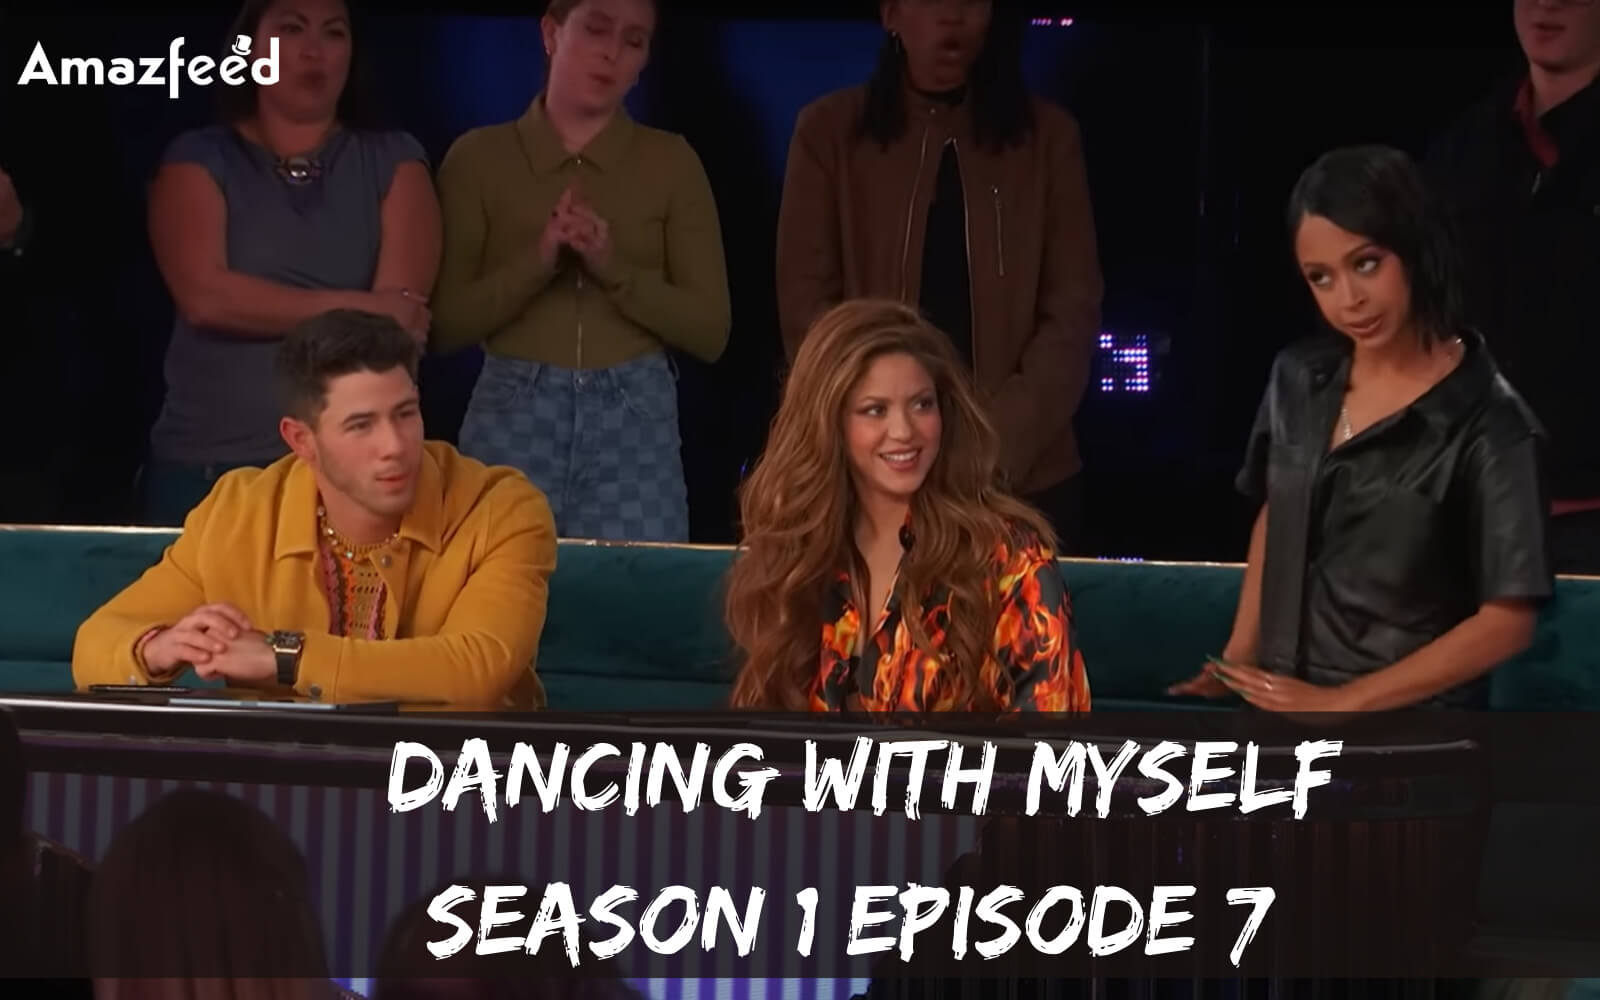 Dancing With Myself Season 1 Episode 7 release date